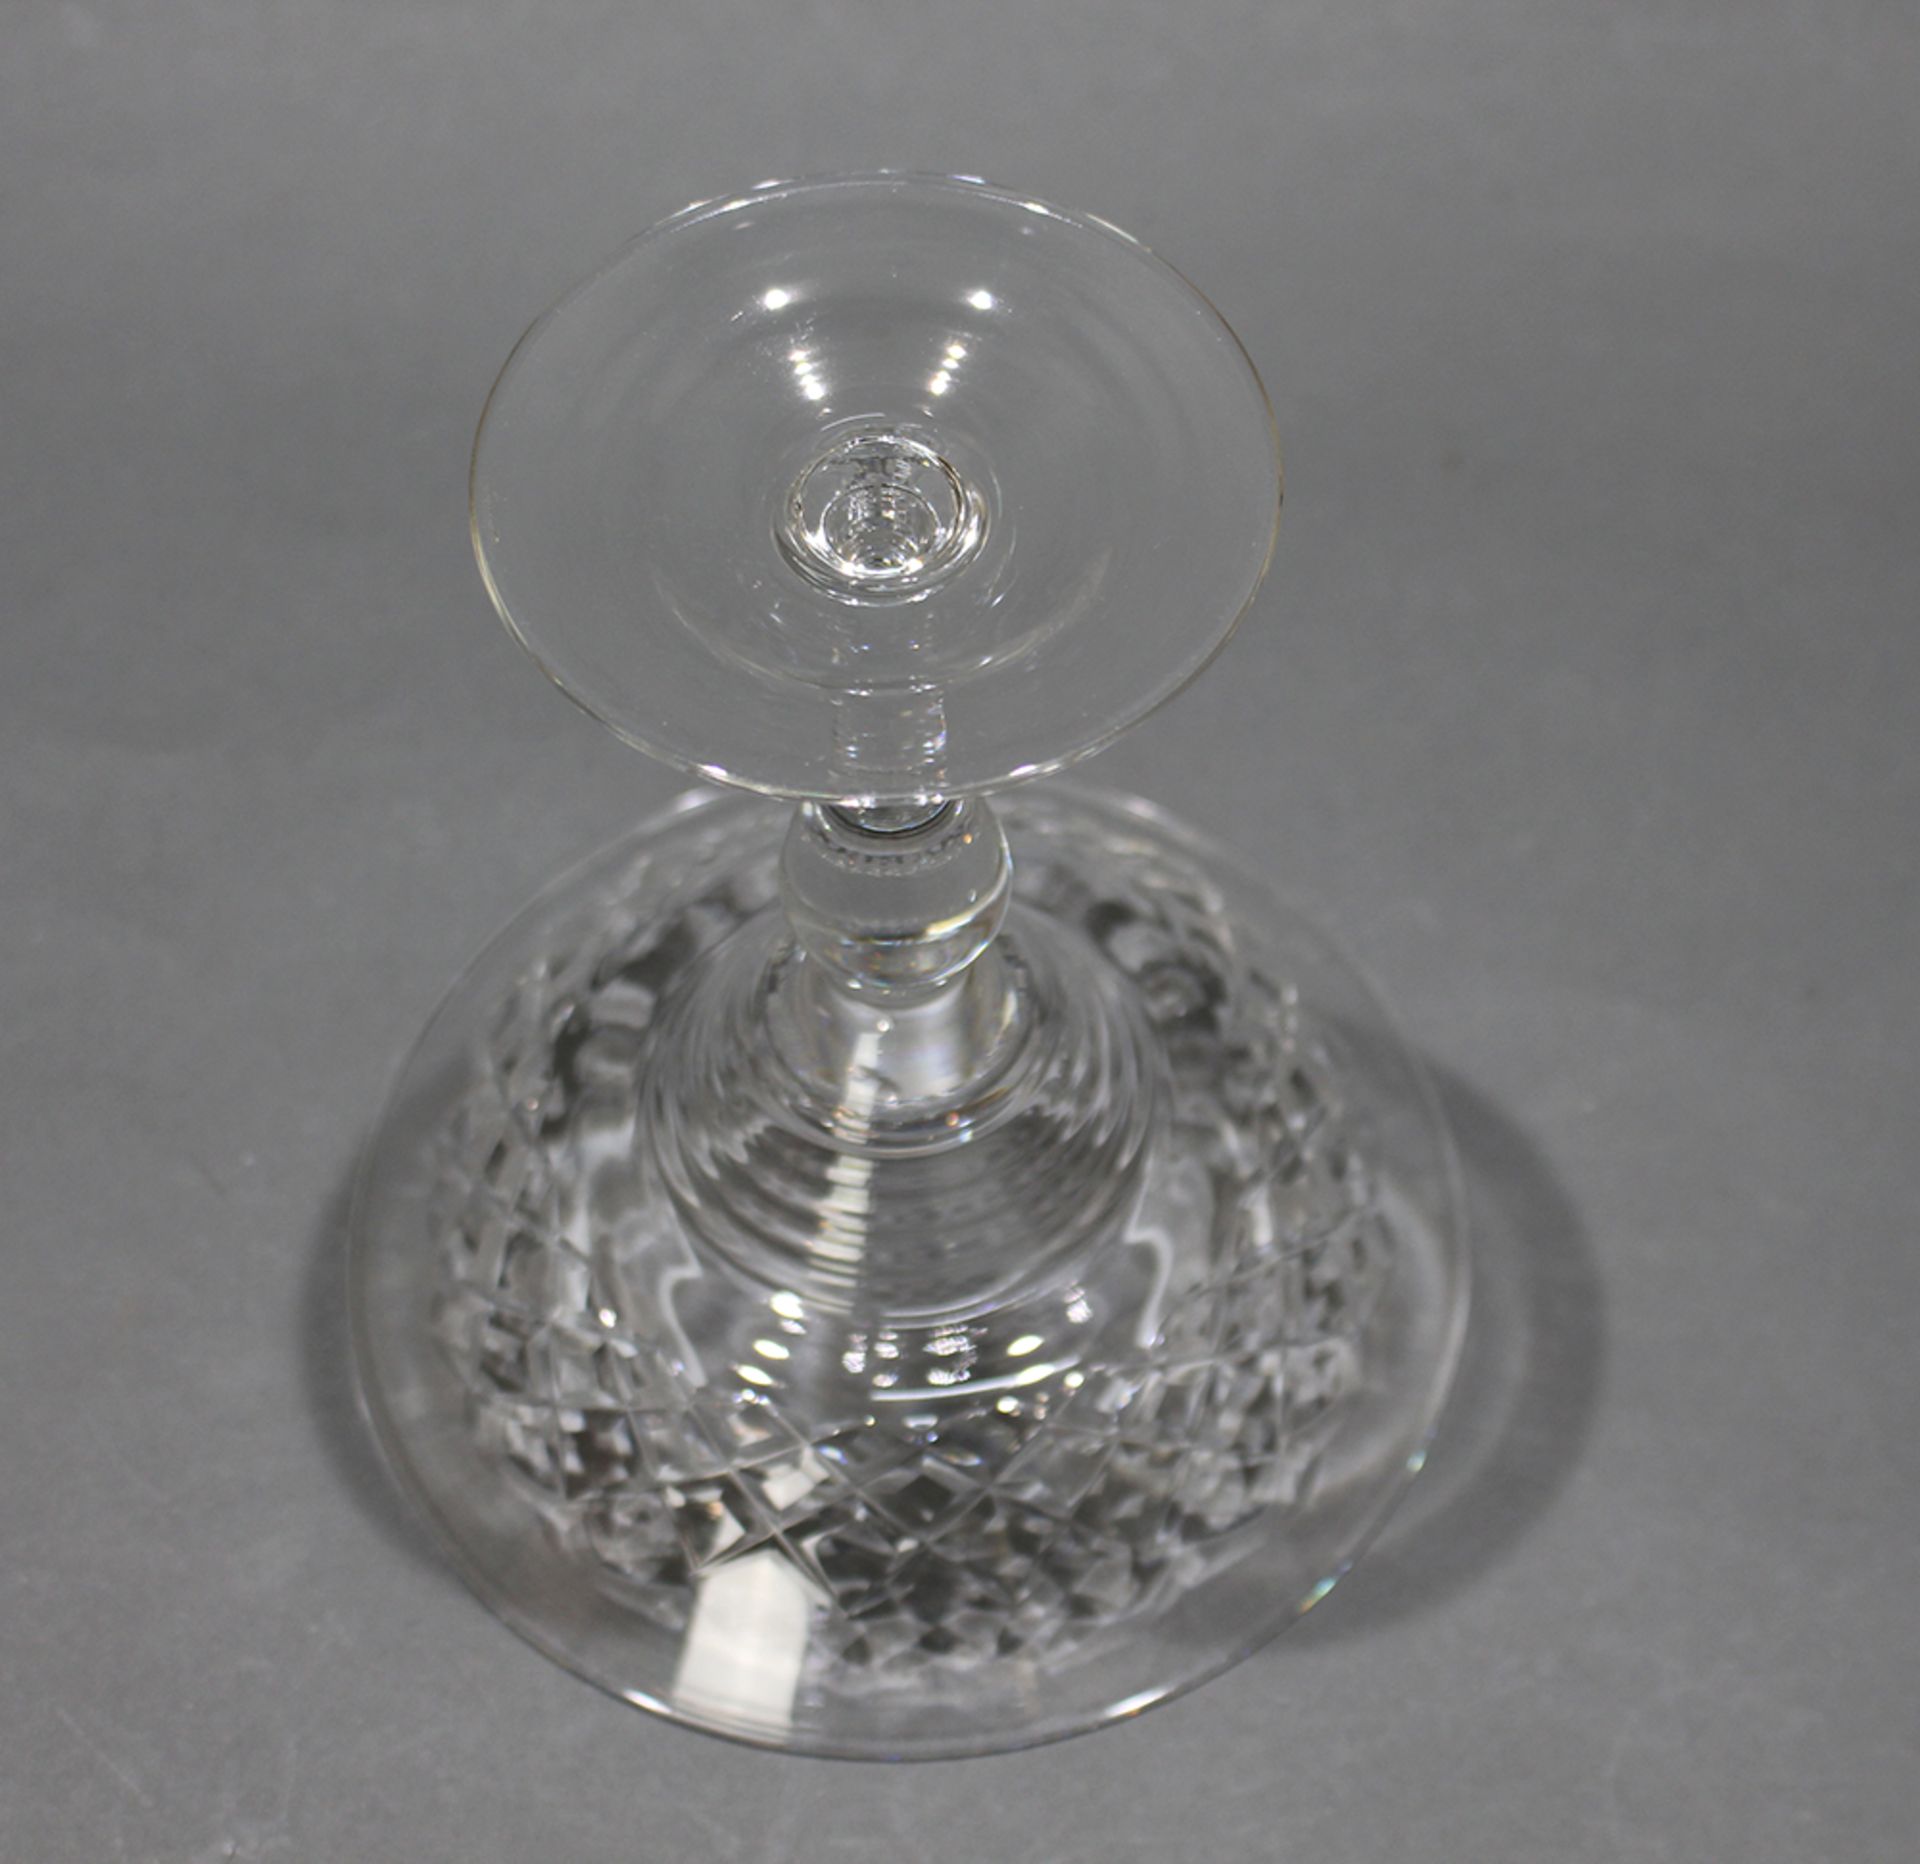 Vintage Cut Glass Crystal Tazza - Image 3 of 3